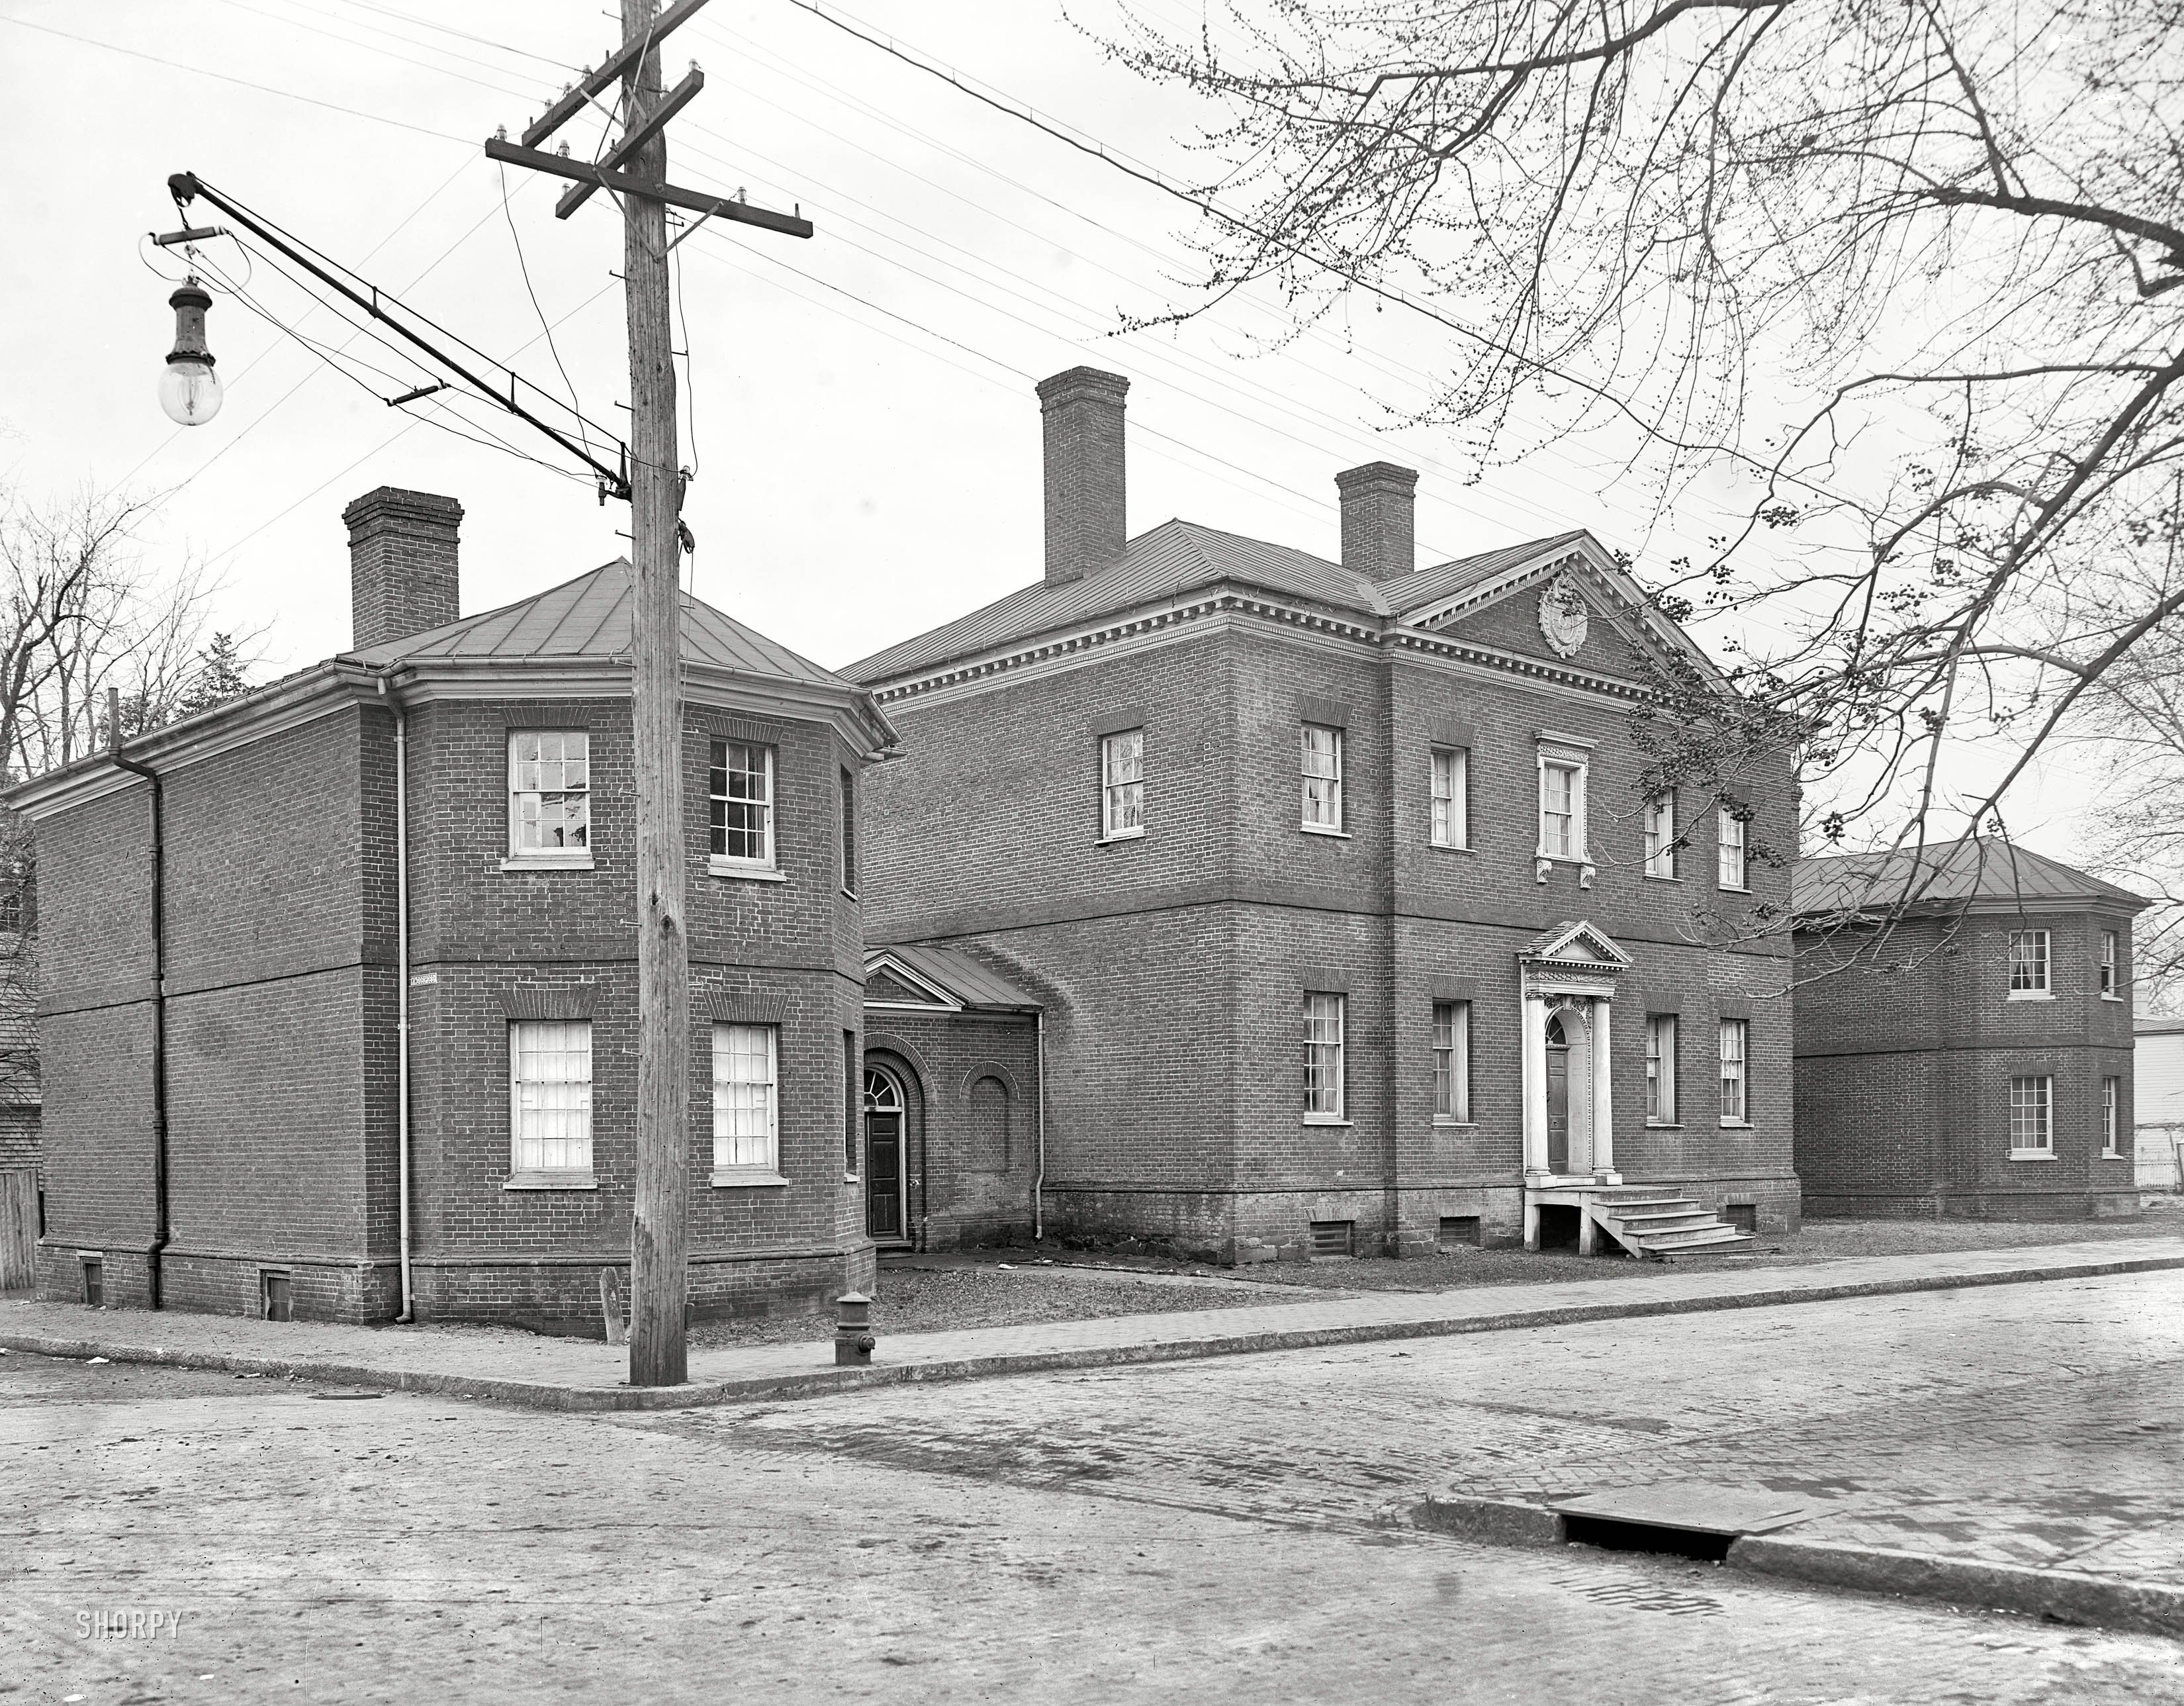 Annapolis, Maryland, circa 1905. "Old Harwood mansion (Hammond-Harwood House)." Street-furniture nerds will appreciate the carbon arc lamp with the yardarm-style boom, and the odd-looking hydrant. View full size.